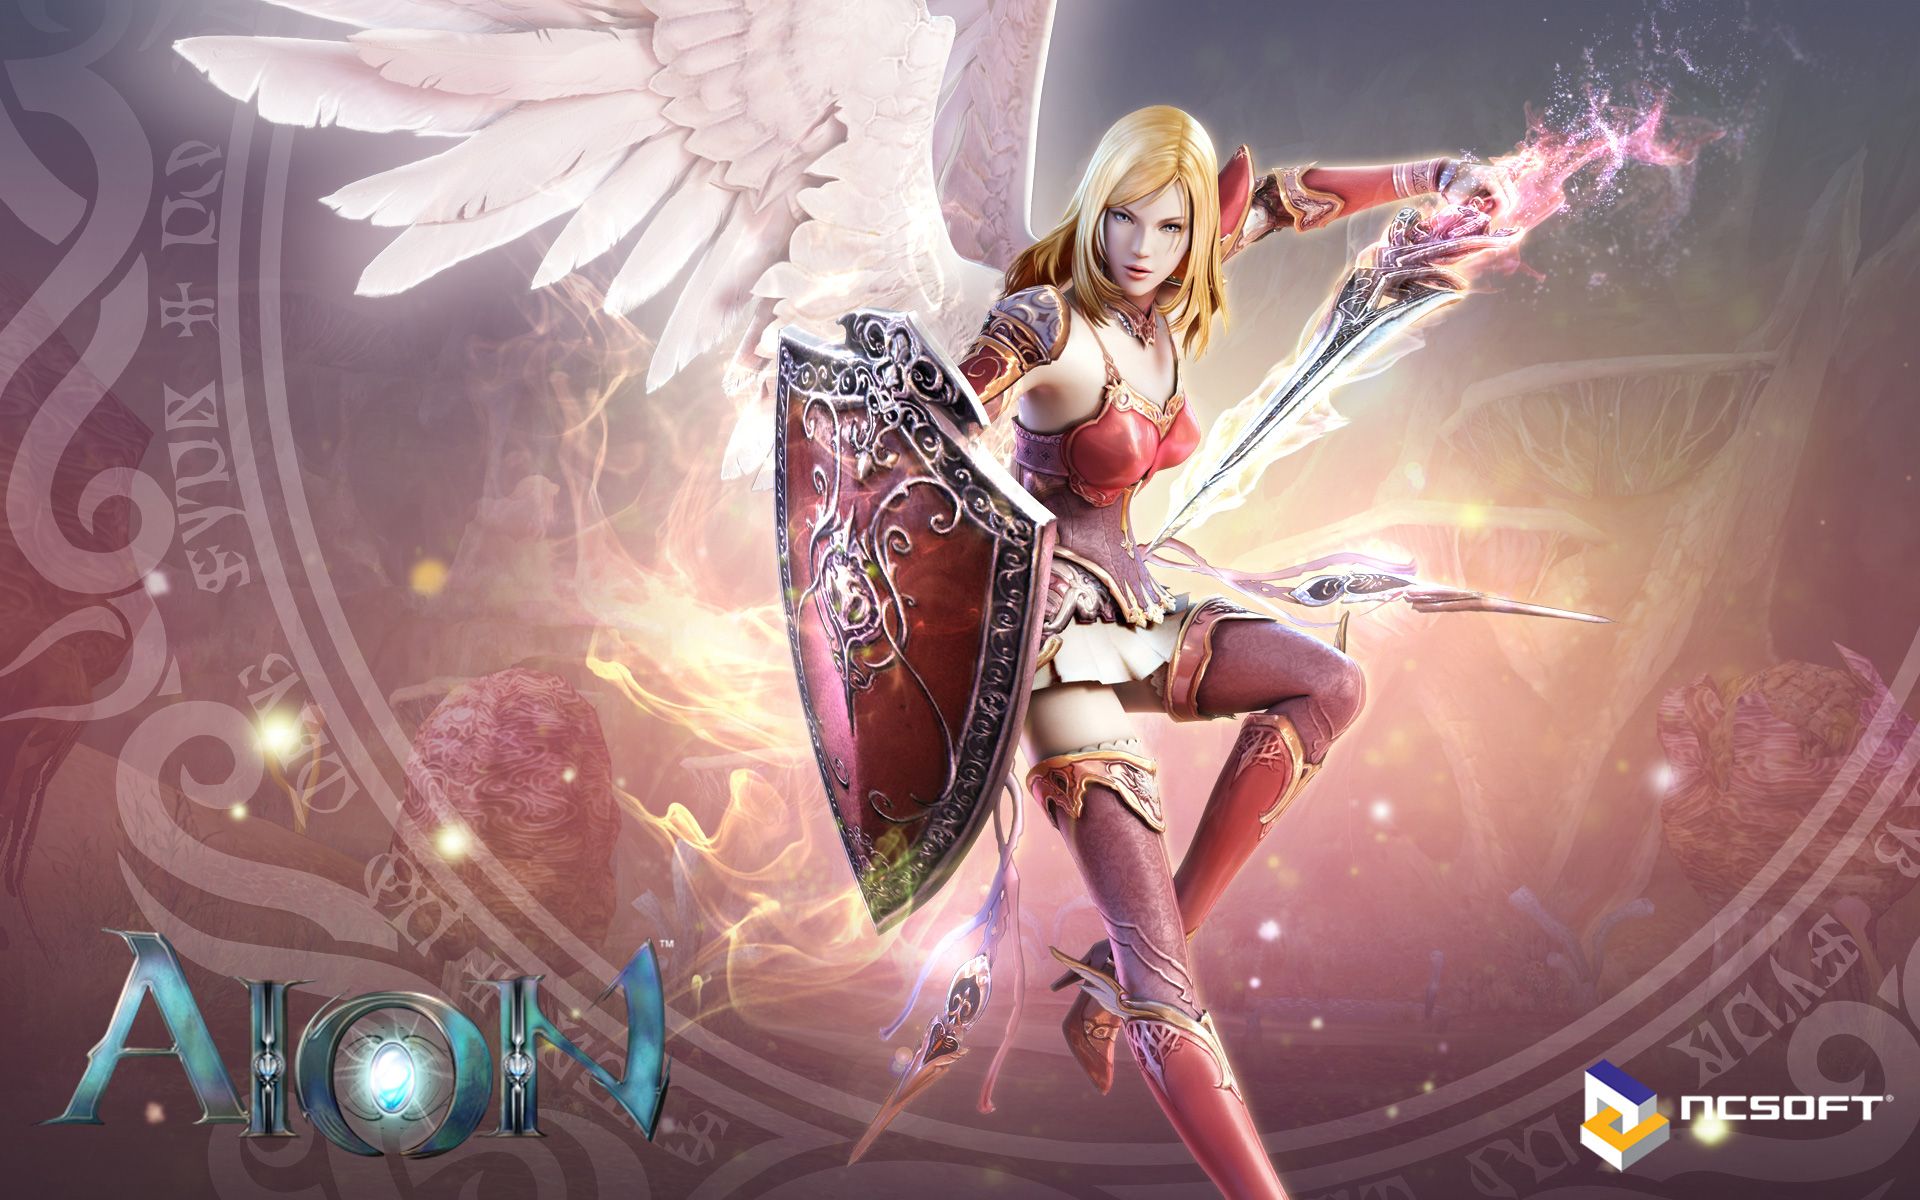 HD wallpaper, Aion, Online, Gladiator, Wallpapers, Games, Hd